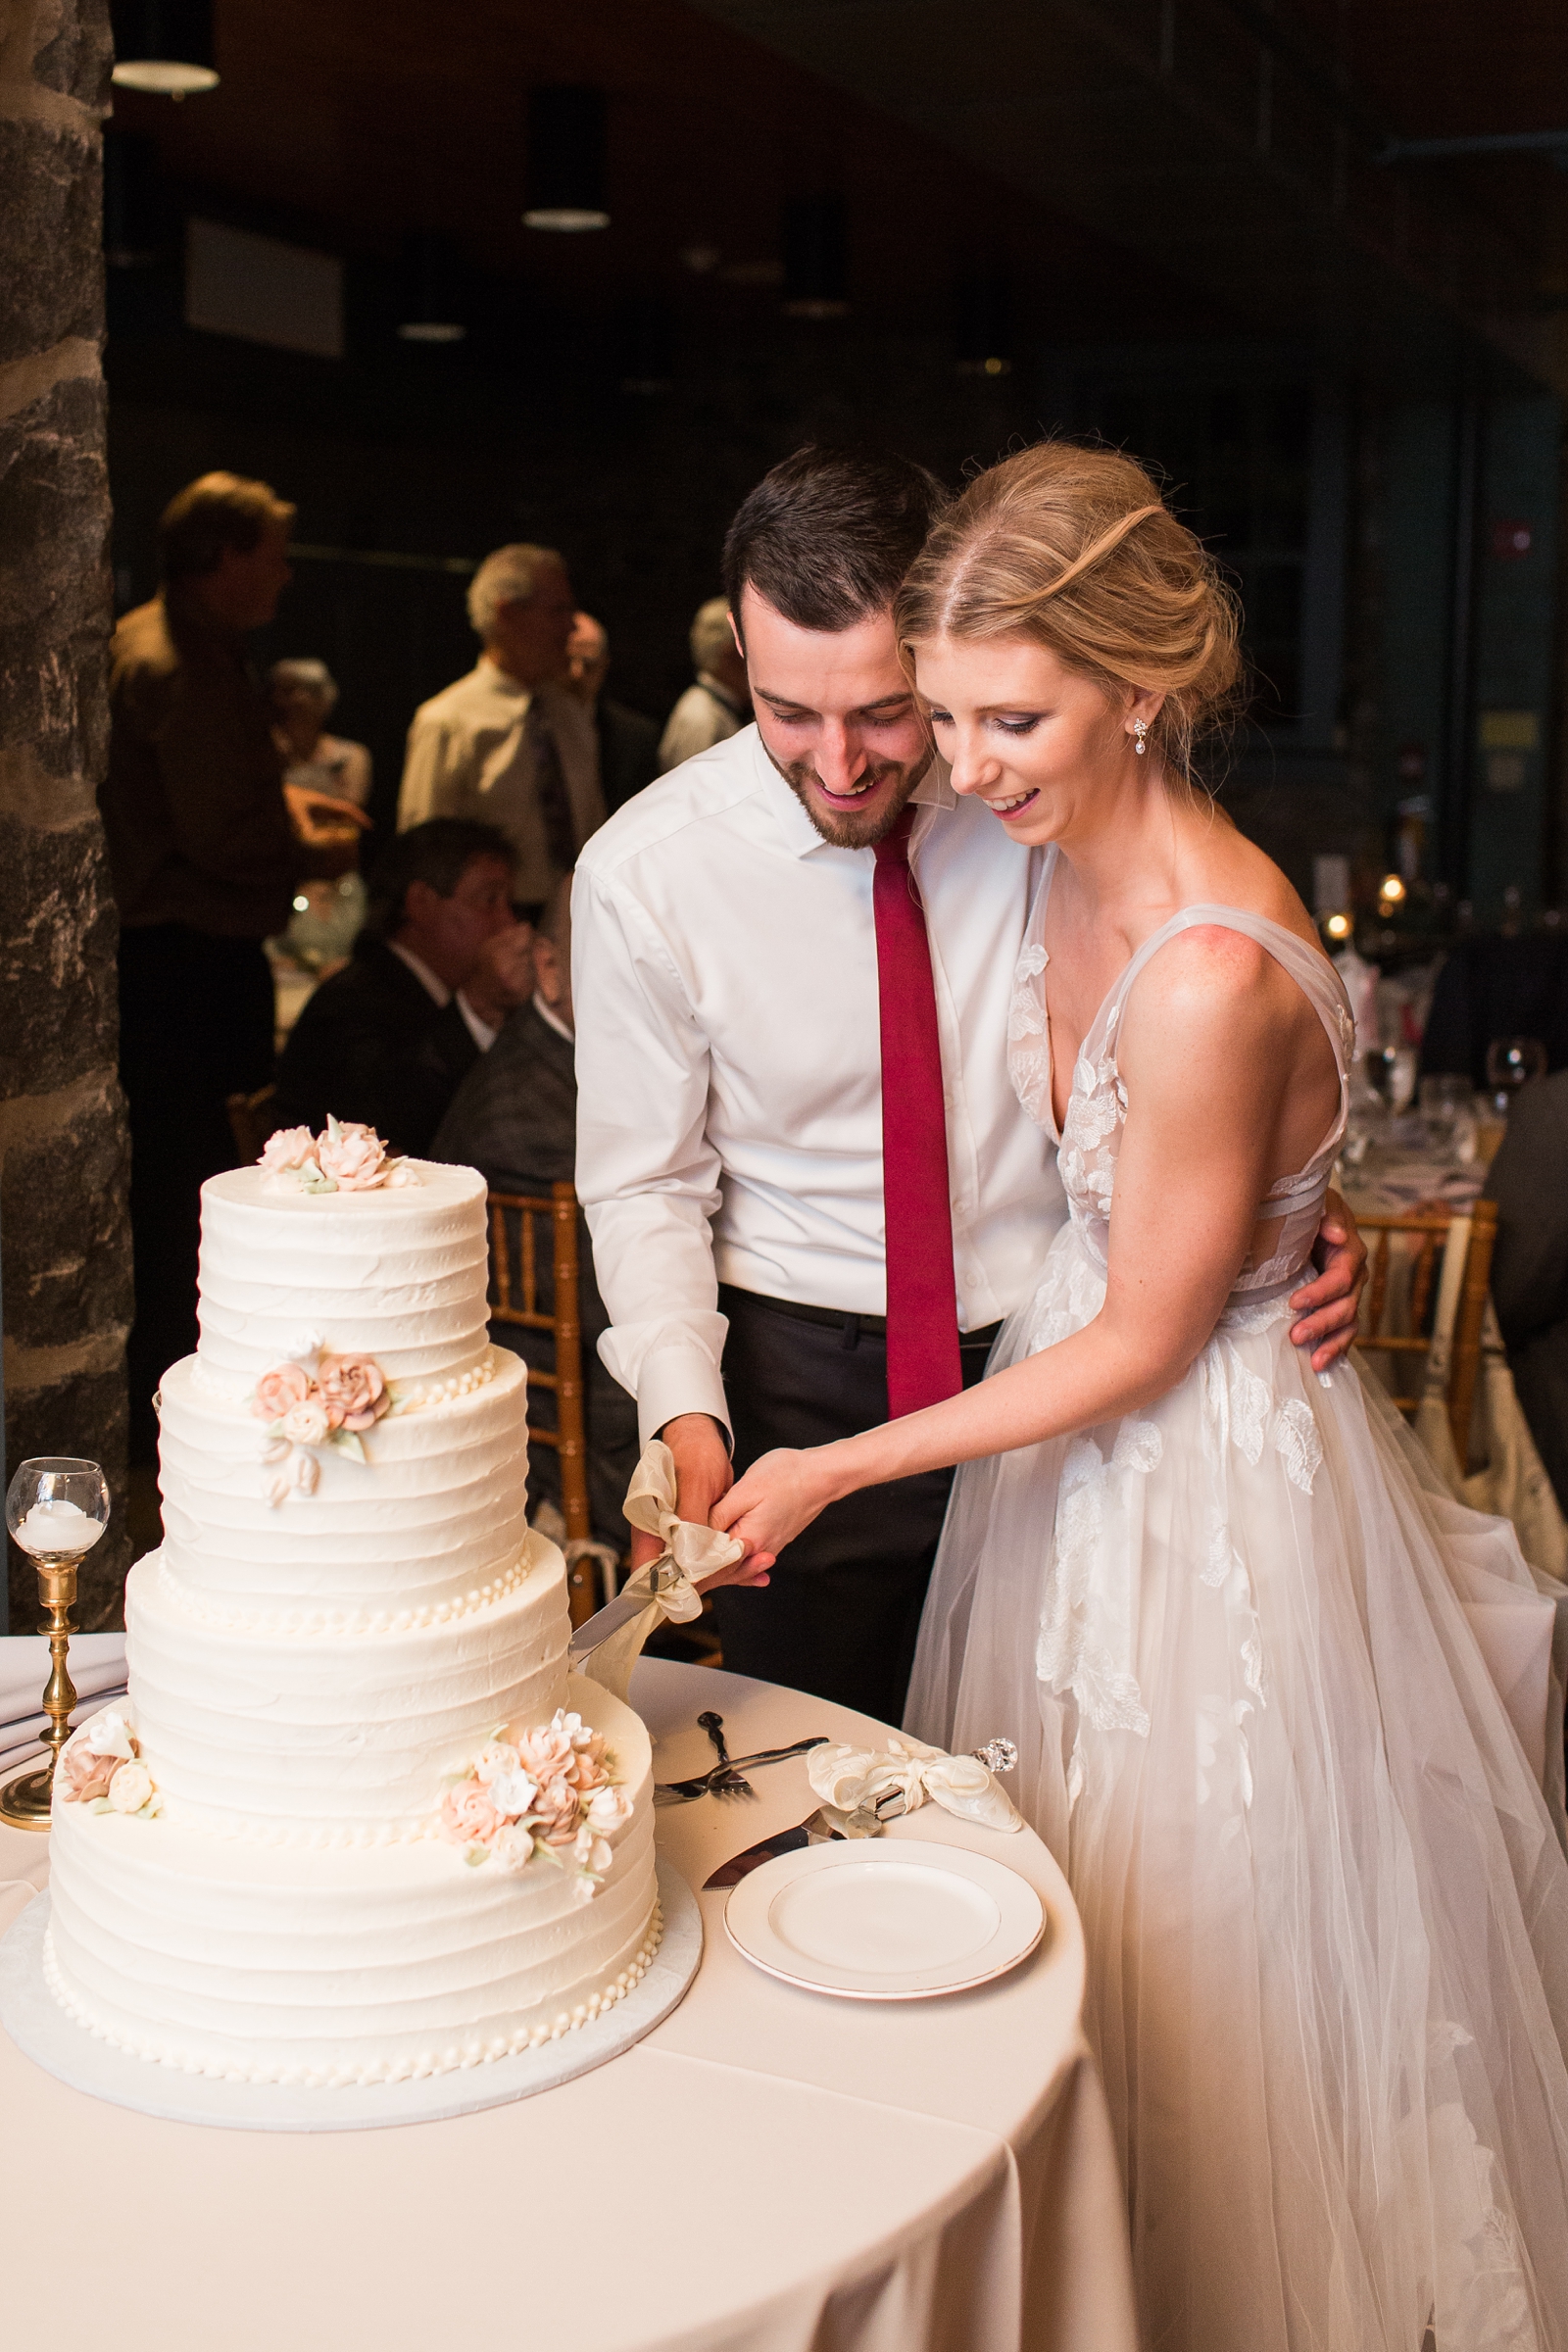 bride and groom cut wedding cake at The Carriage House at Rockwood Park wedding reception